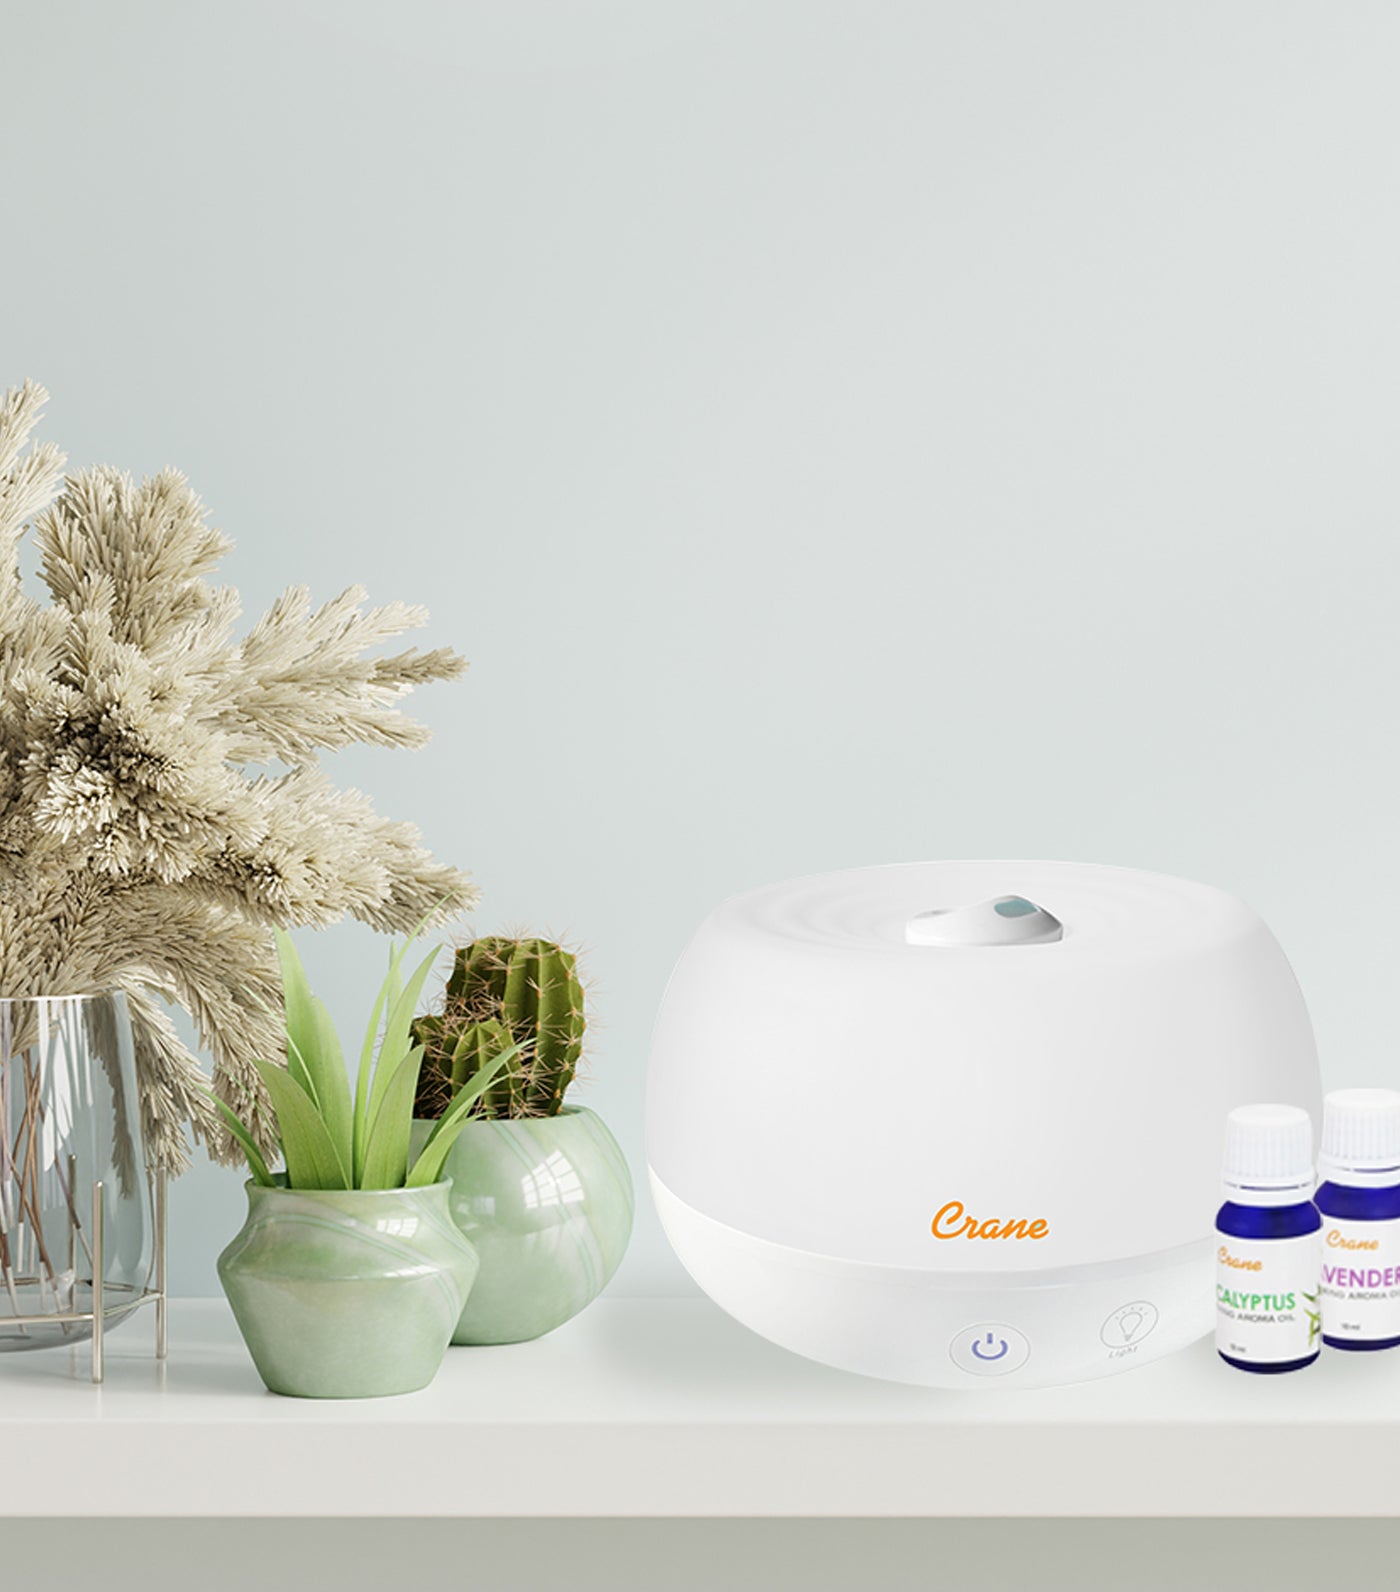 crane 2-in-1 personal cool mist humidifier with aroma diffuser